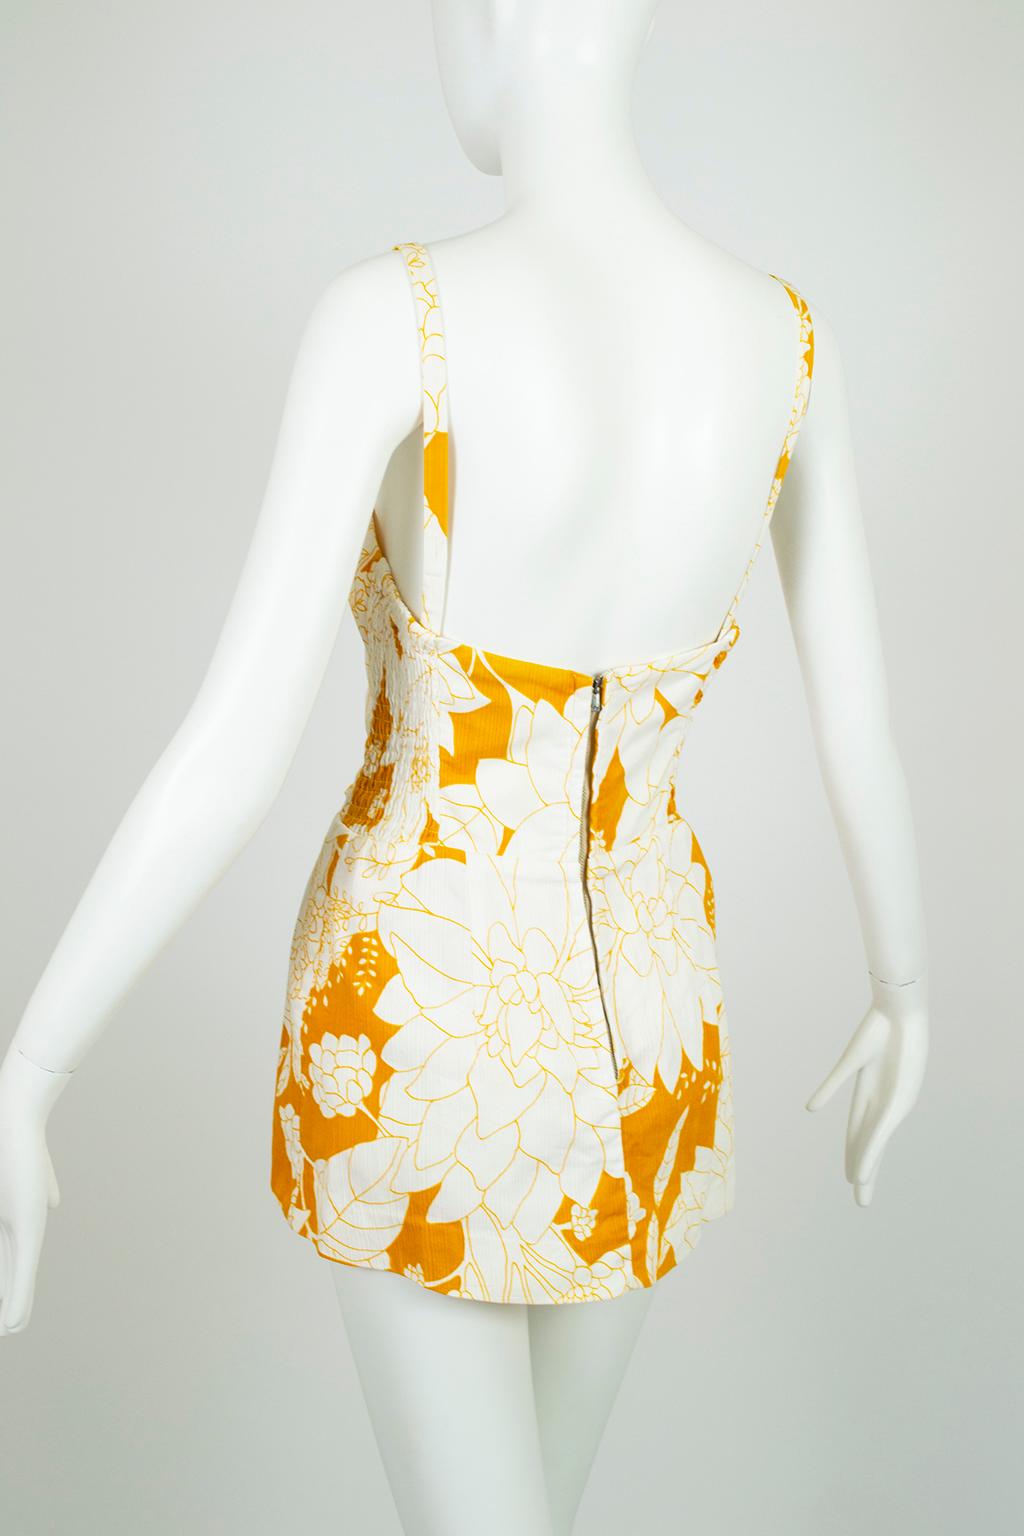 Yellow Polynesian Print Tulip Skirt Swimsuit Play Suit Beach Romper – S, 1950s In Excellent Condition For Sale In Tucson, AZ